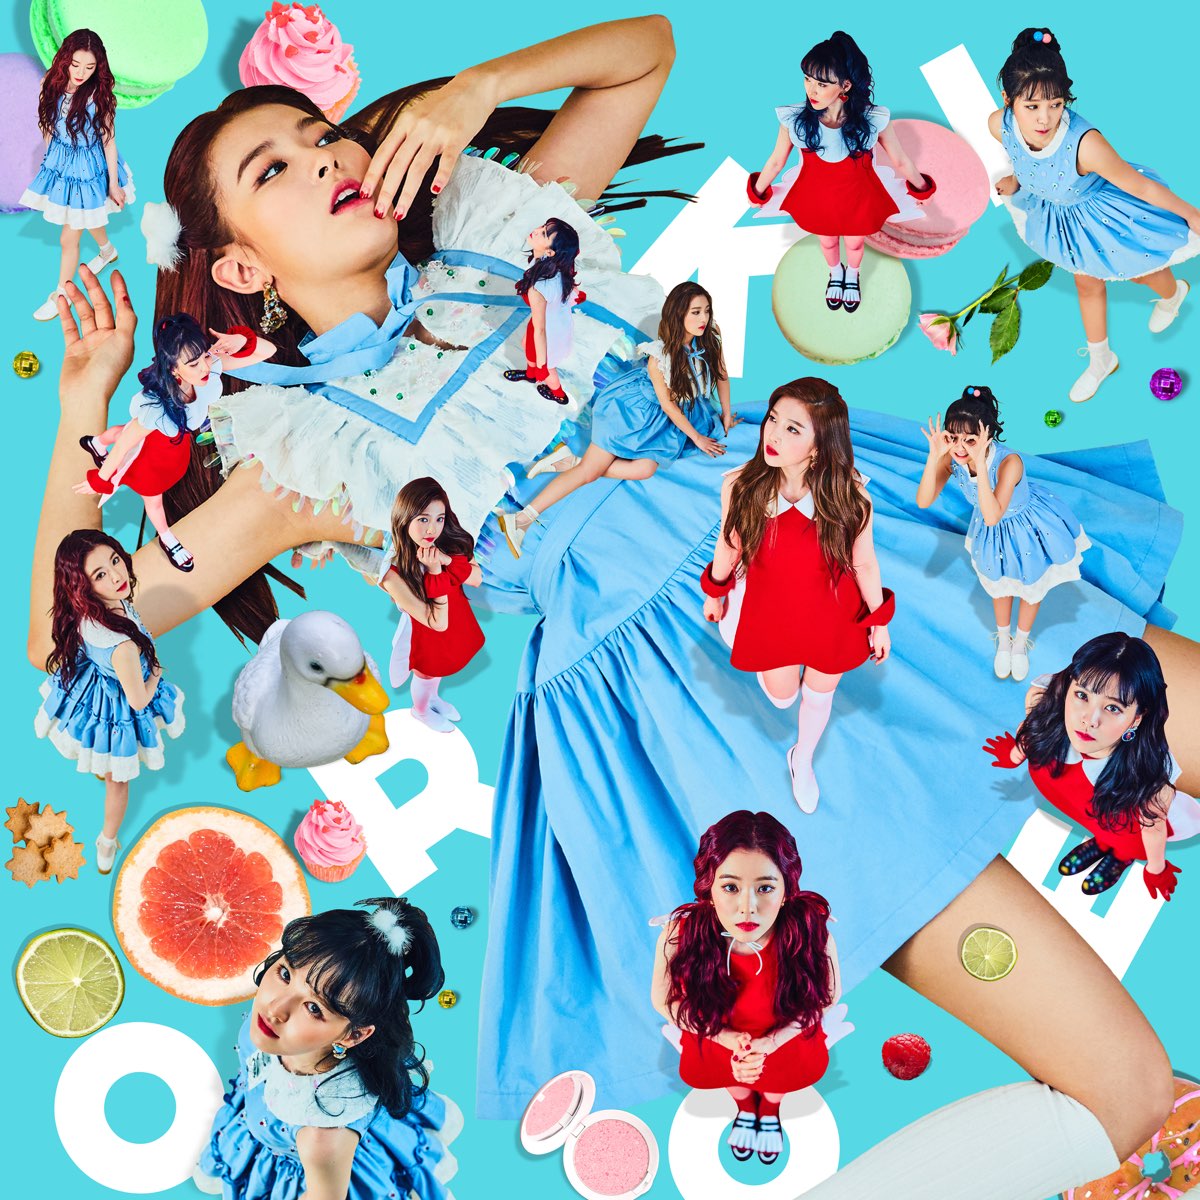 Rookie - The 4th Mini Album - EP by Red Velvet on Apple Music